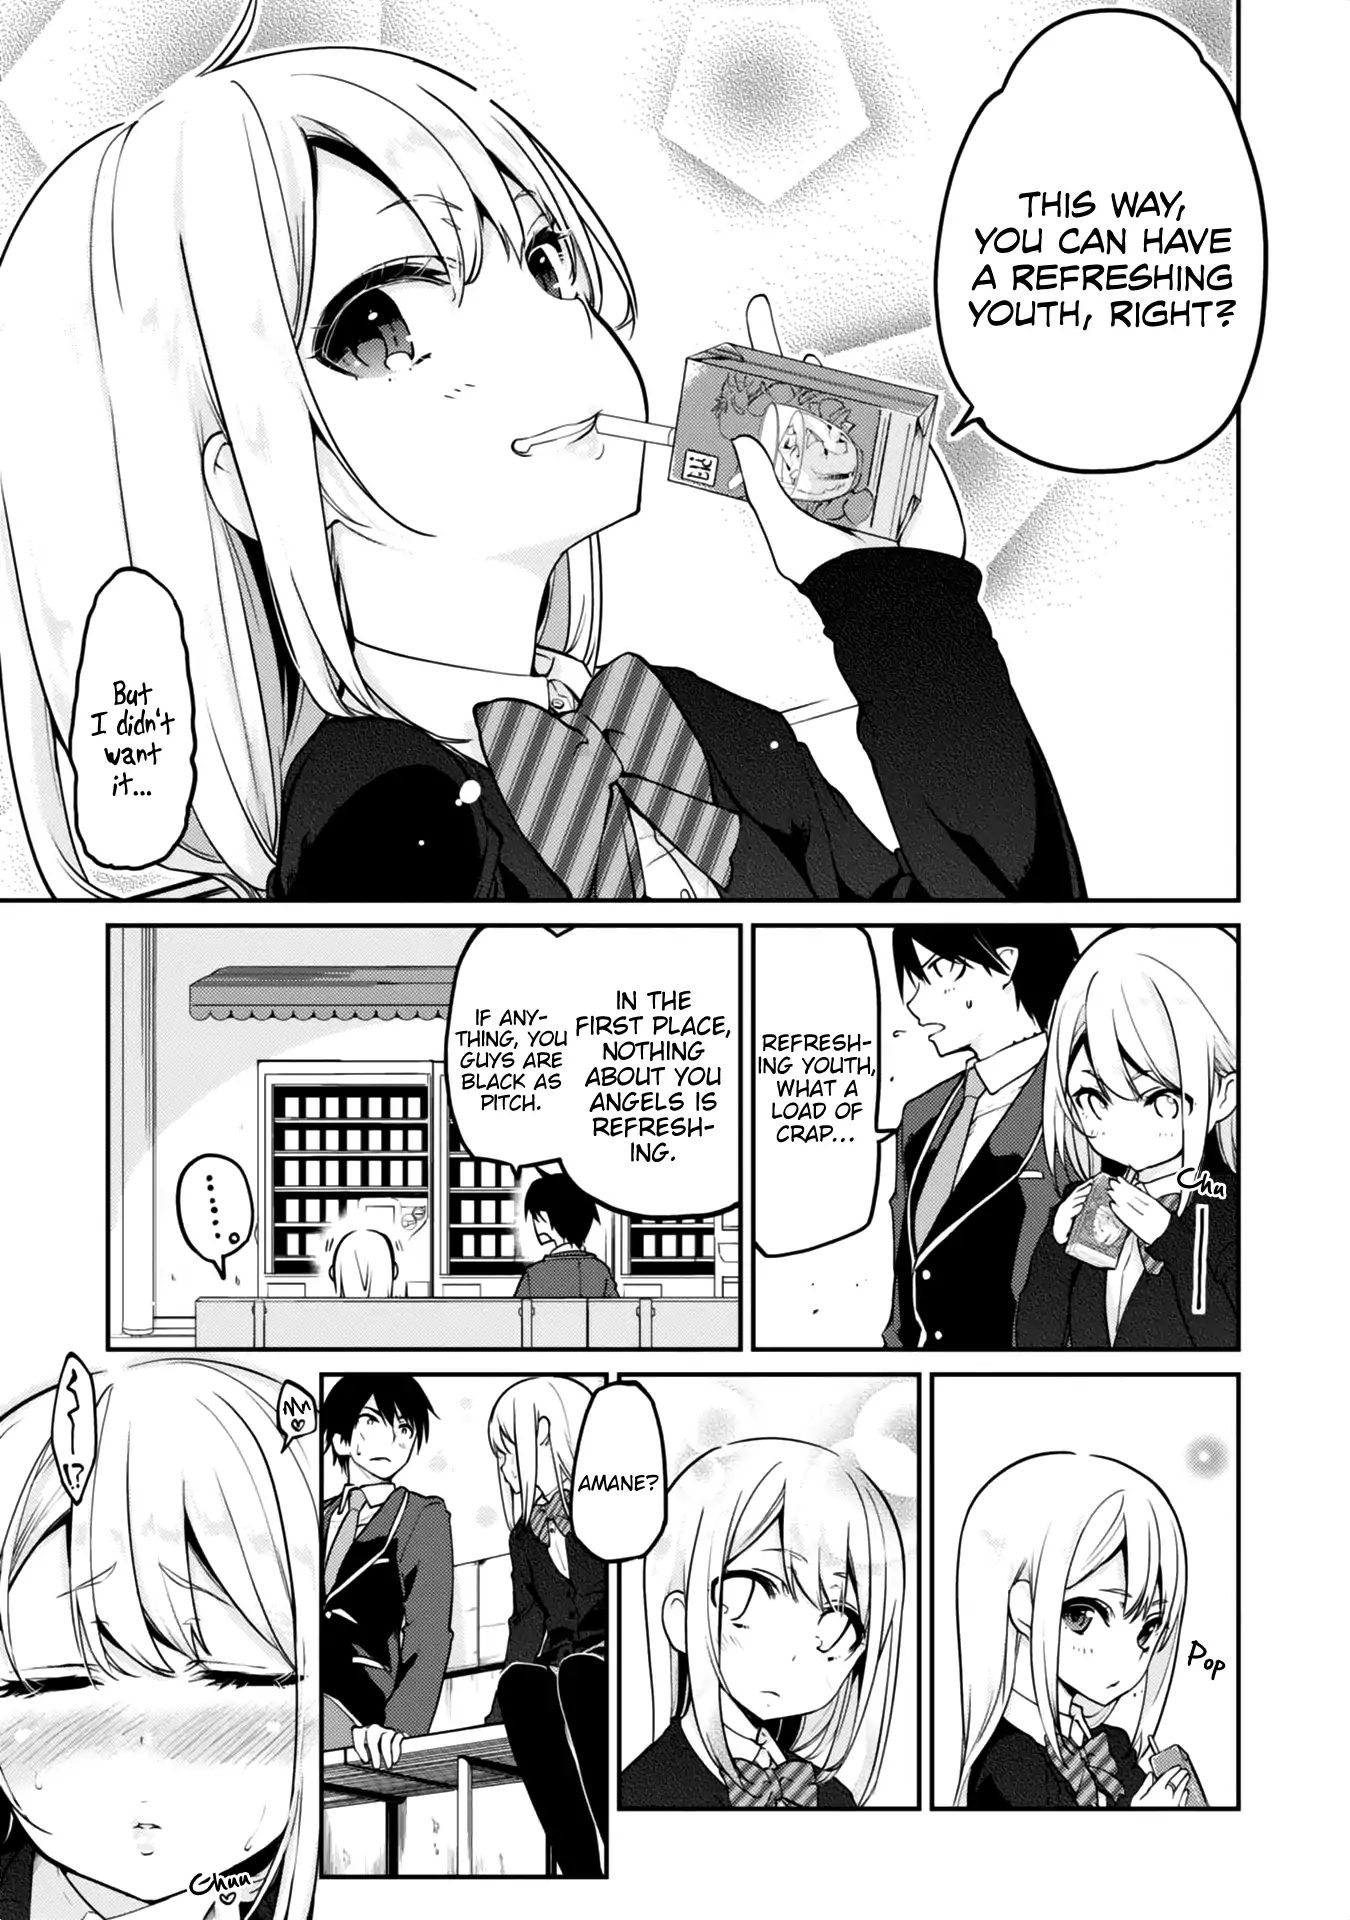 The Foolish Angel Dances With Demons Vol.2 Chapter 7.5: Geez, Those Modern Vending Machines - Picture 3